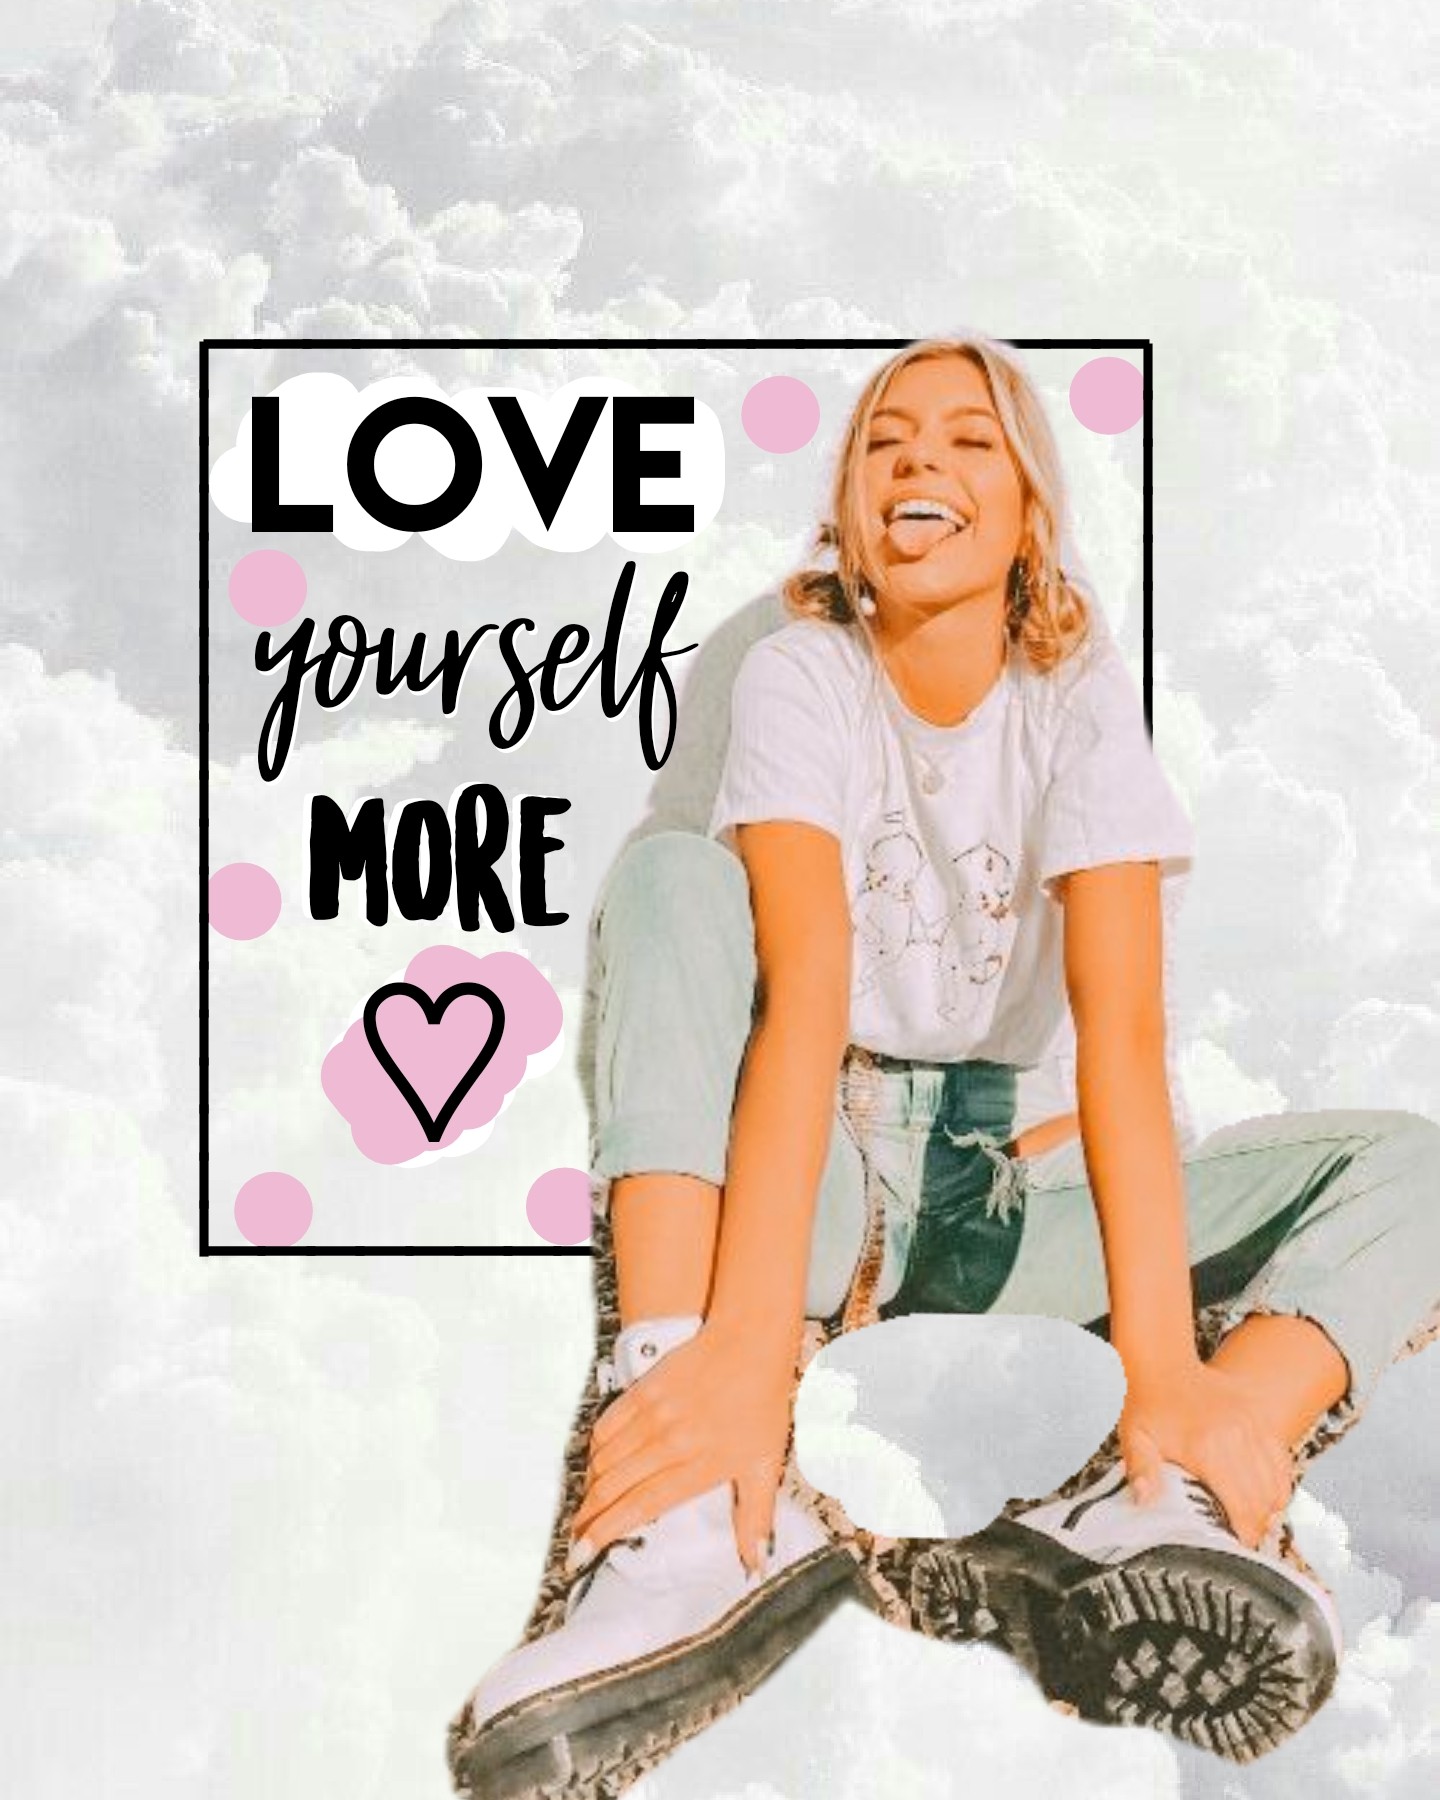 🫶TAP🫶
Love yourself more. YOU DESERVE IT! ♡